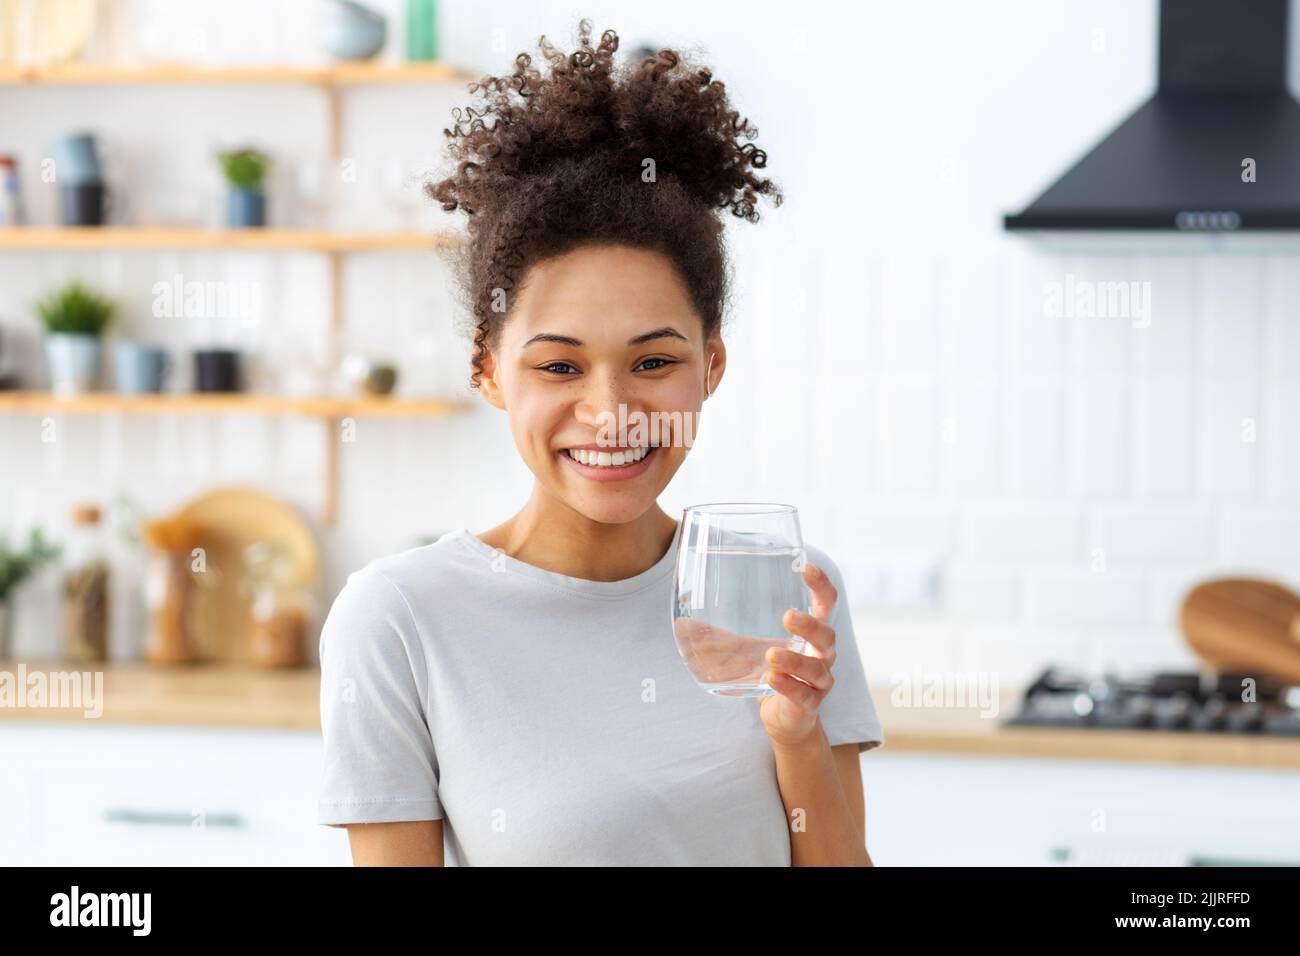 Healthy lifestyle concept Beautiful young woman holding glass of clean fresh water Stock Photo